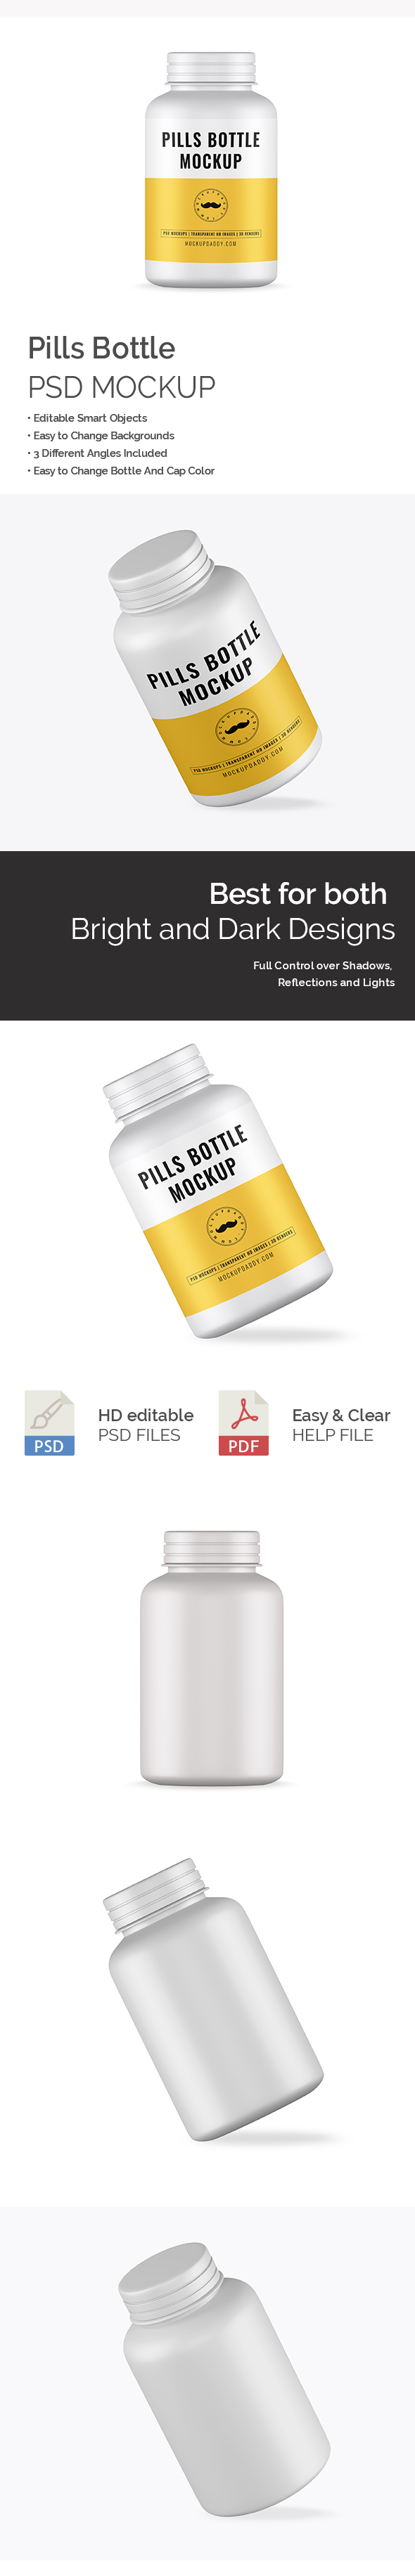  Customizable Pills Bottle MockUp with yellow label on white background.